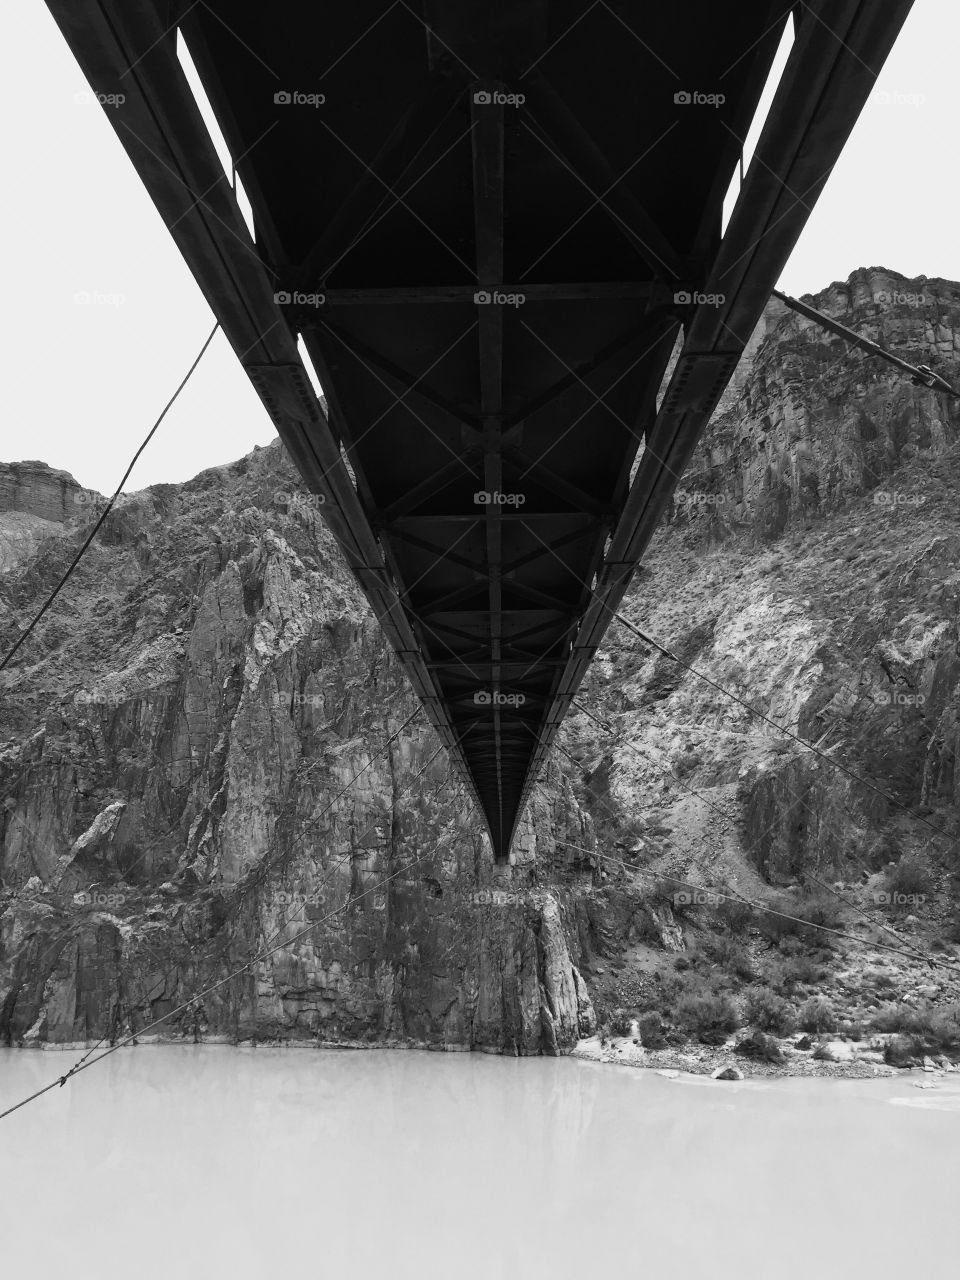 A little while ago I hiked to the Bottom of the Grand Canyon. At the bottom we had to cross the Colorado River via this suspension bridge. That amazing part about this bridge is that all of the material for it were carried down by mule! 